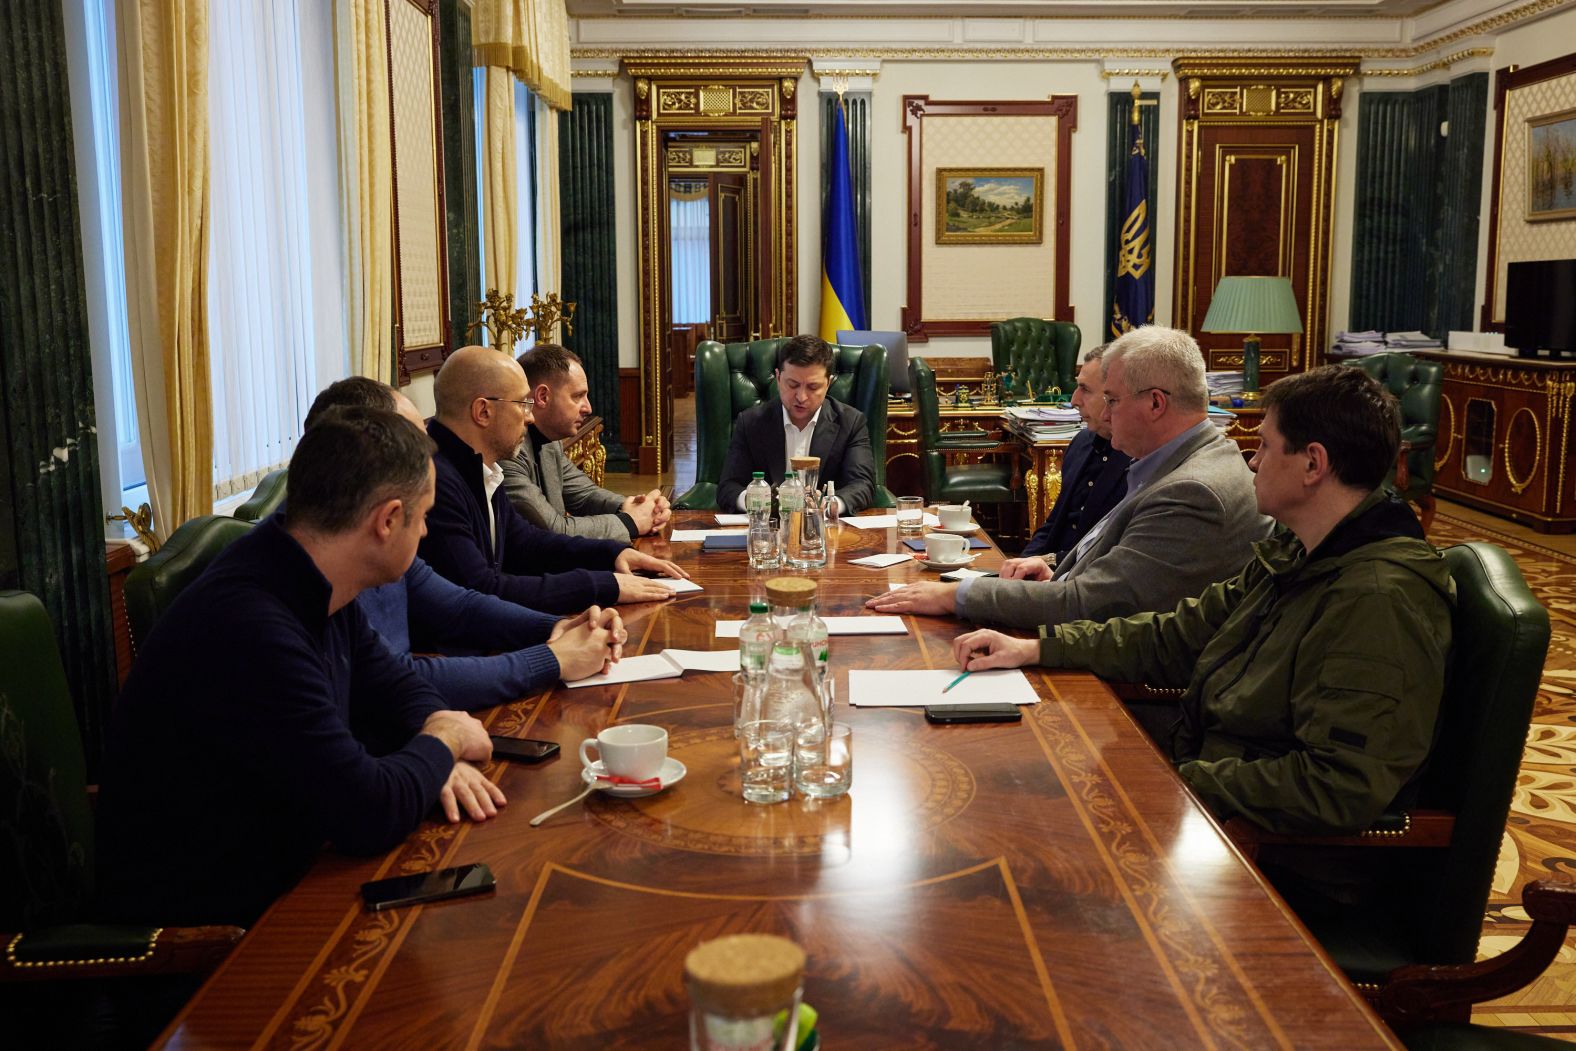 Ukrainian President Zelensky holds an emergency meeting in Kyiv on February 24. <a href="index.php?page=&url=https%3A%2F%2Fwww.cnn.com%2Feurope%2Flive-news%2Fukraine-russia-news-02-23-22%2Fh_1831ec828890a281e4fcfc8db92e3c4b" target="_blank">In a video address,</a> Zelensky announced that he was introducing martial law. He urged people to remain calm.